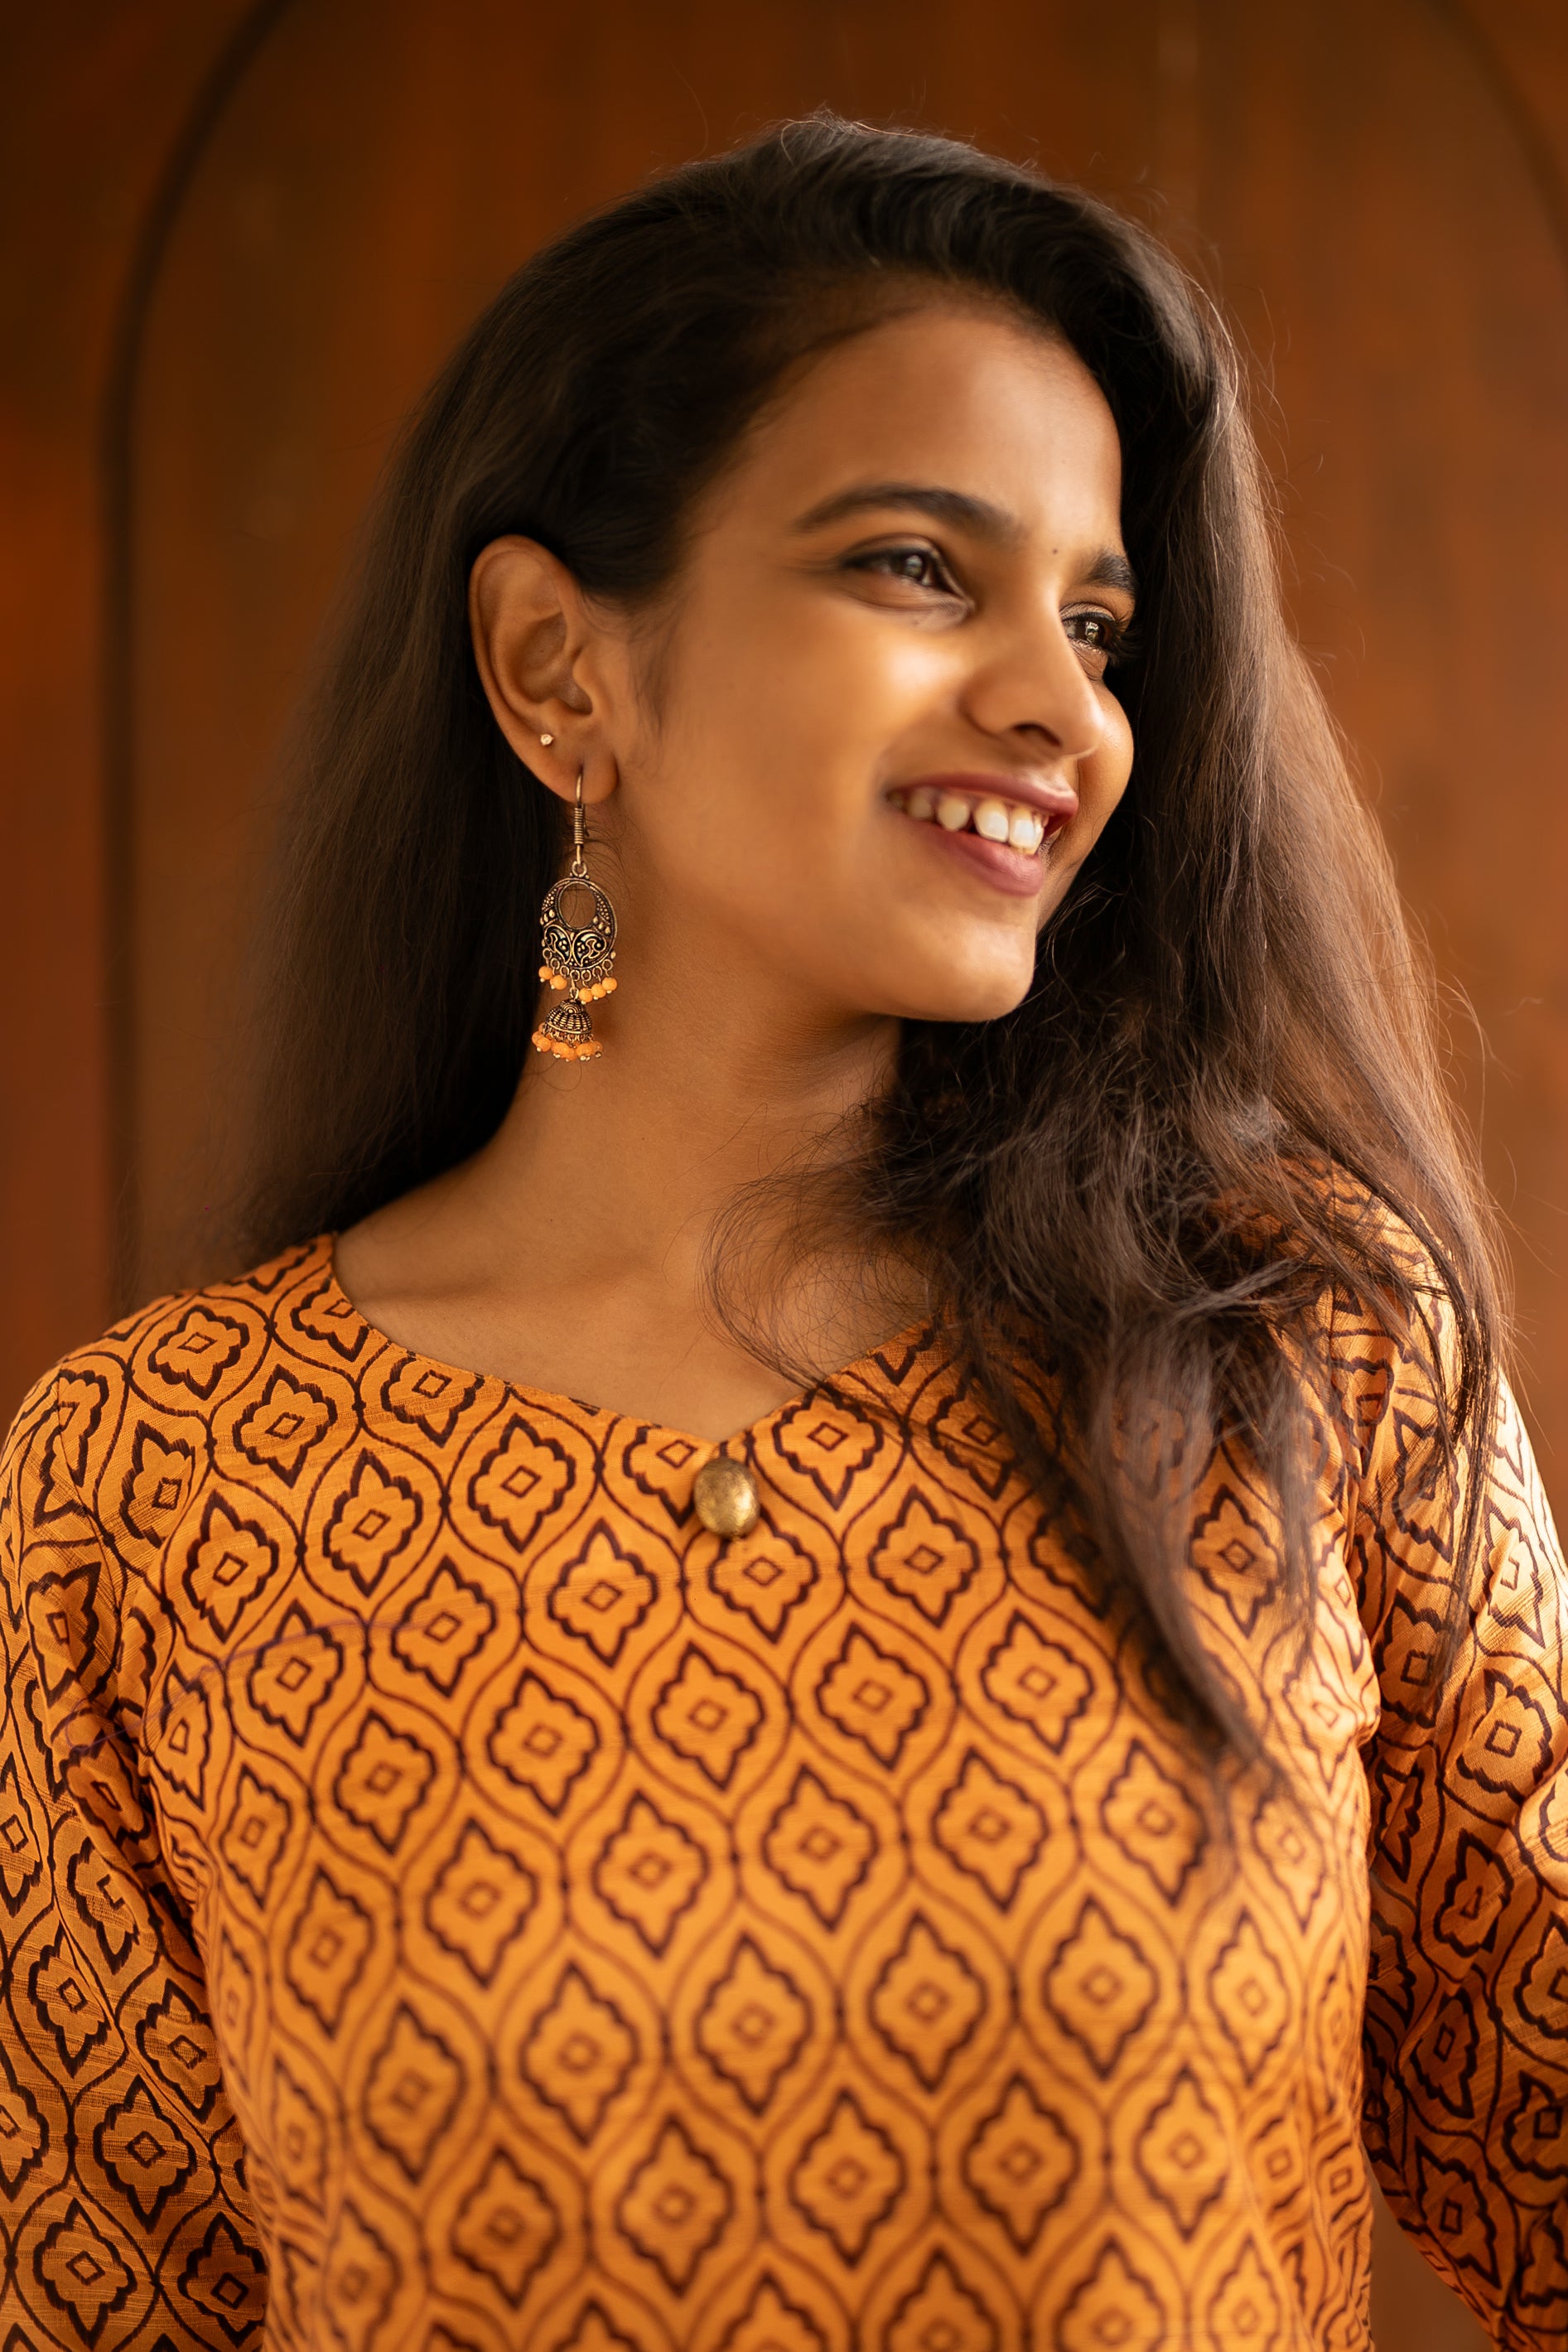 A Classic Sakyaa design featuring semi tussar fabric, lined with a warm and elegant gold lace and 3/4th sleeves. Accessorised with a simple oxidised hanging earing